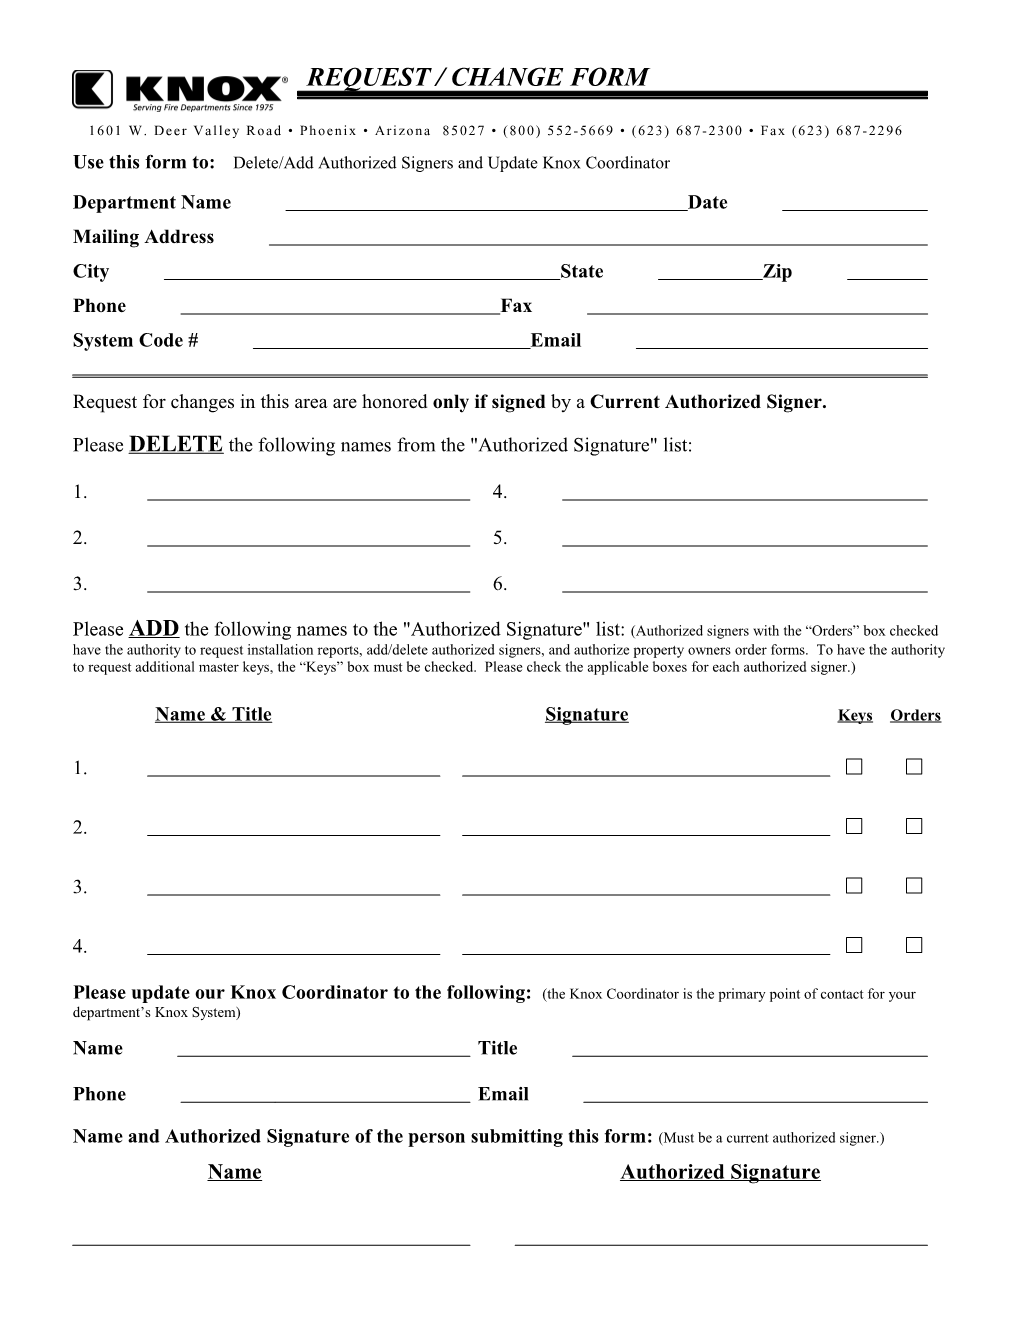 Use This Form To